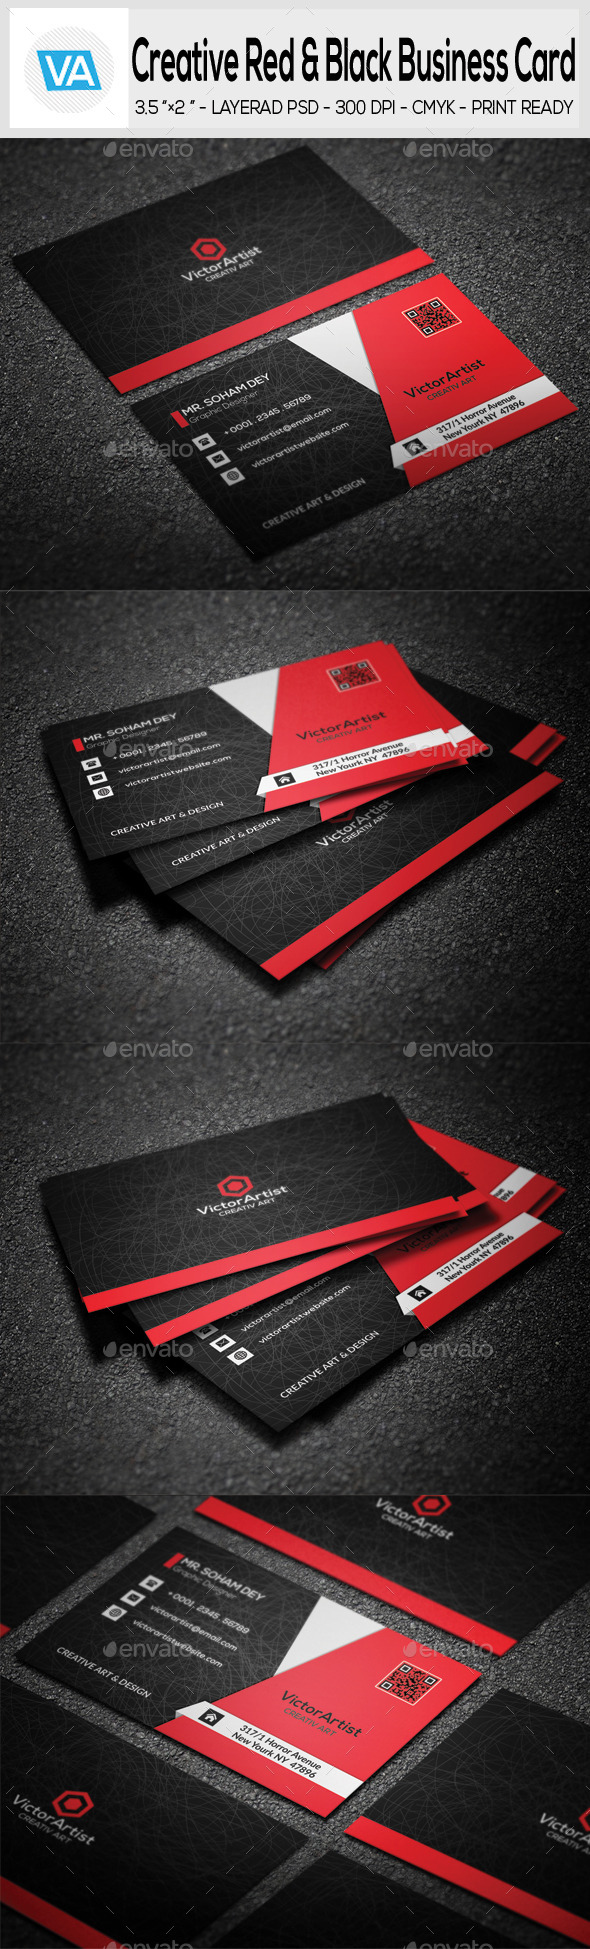 Creative Red & Black Business Card With Ibm Business Card Template